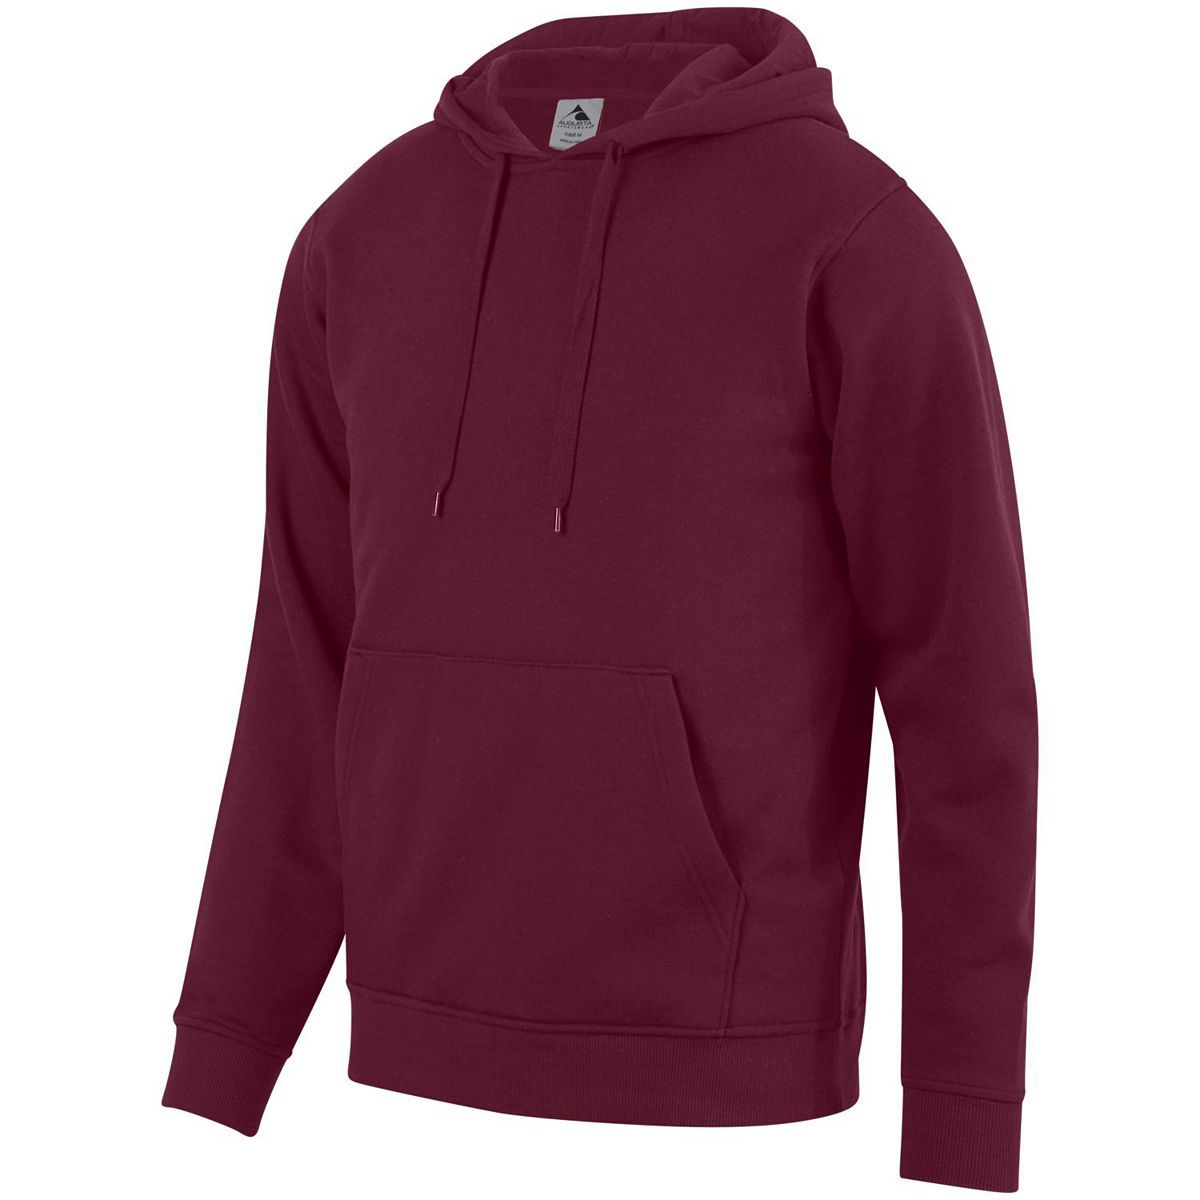 Augusta Sportswear Youth 60/40 Fleece Hoodie in Maroon  -Part of the Youth, Youth-Hoodie, Hoodies, Augusta-Products product lines at KanaleyCreations.com